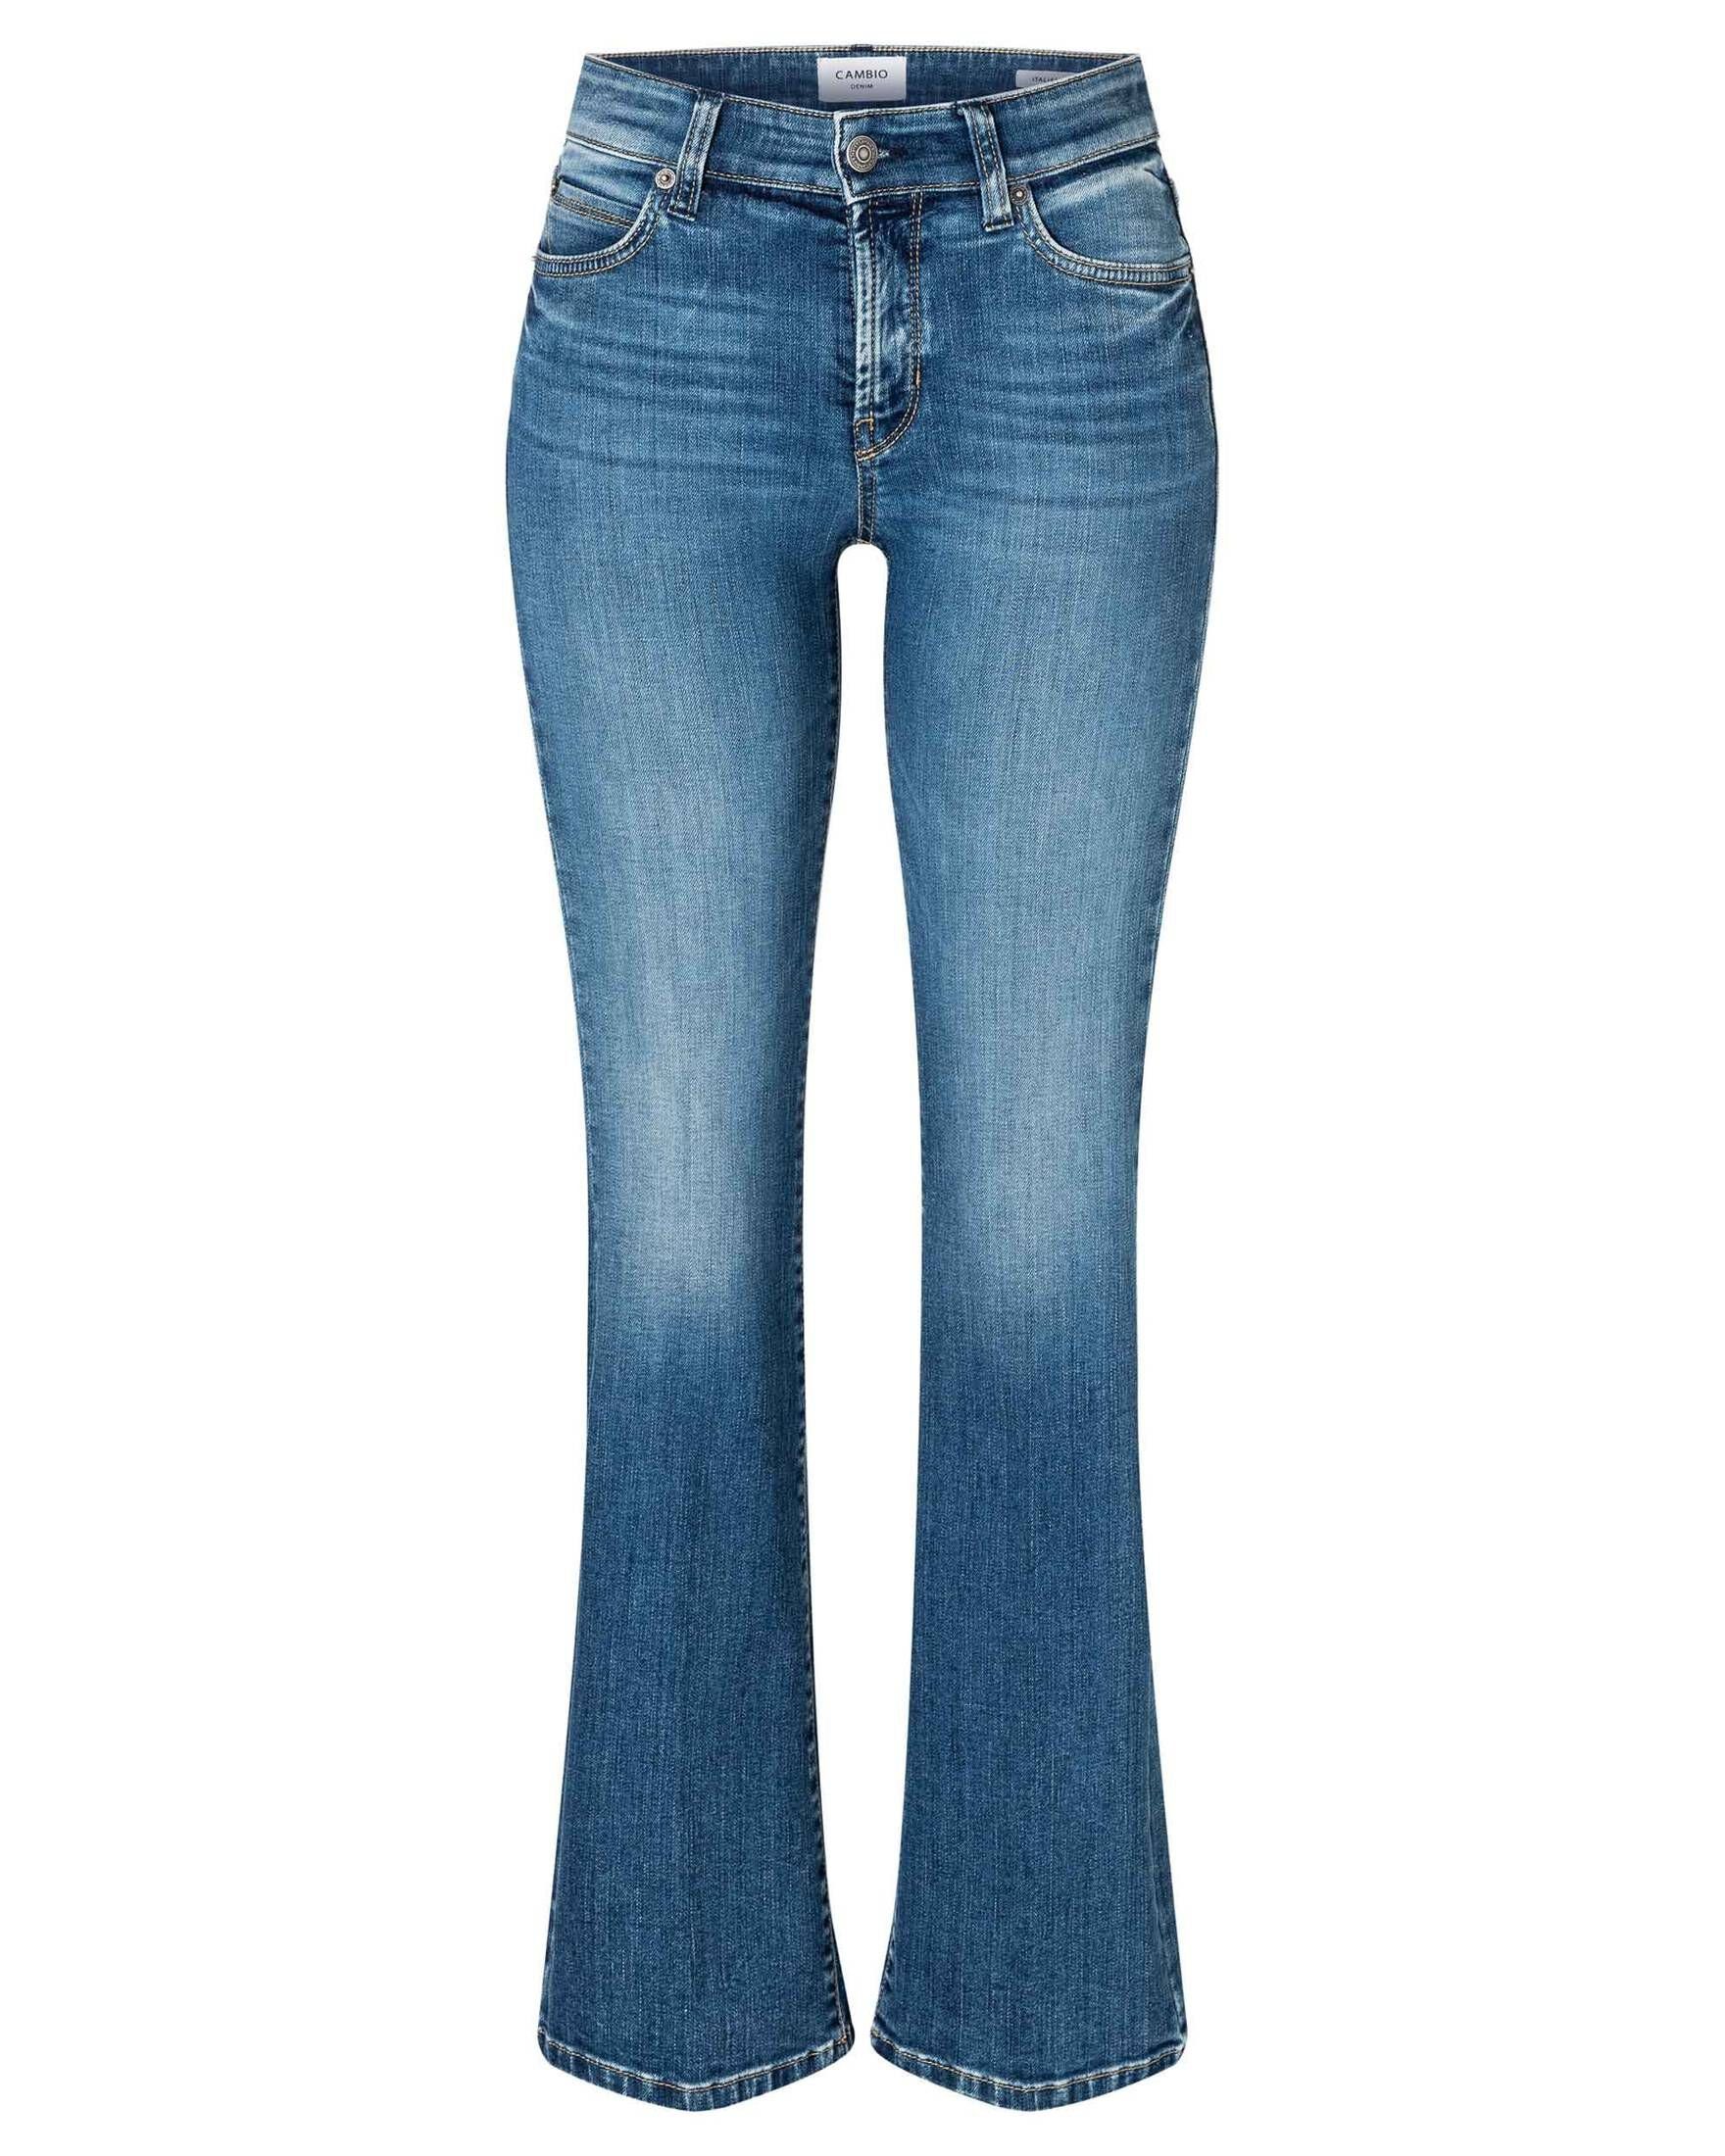 Bootcutjeans Damen Cambio (1-tlg) 5-Pocket-Jeans